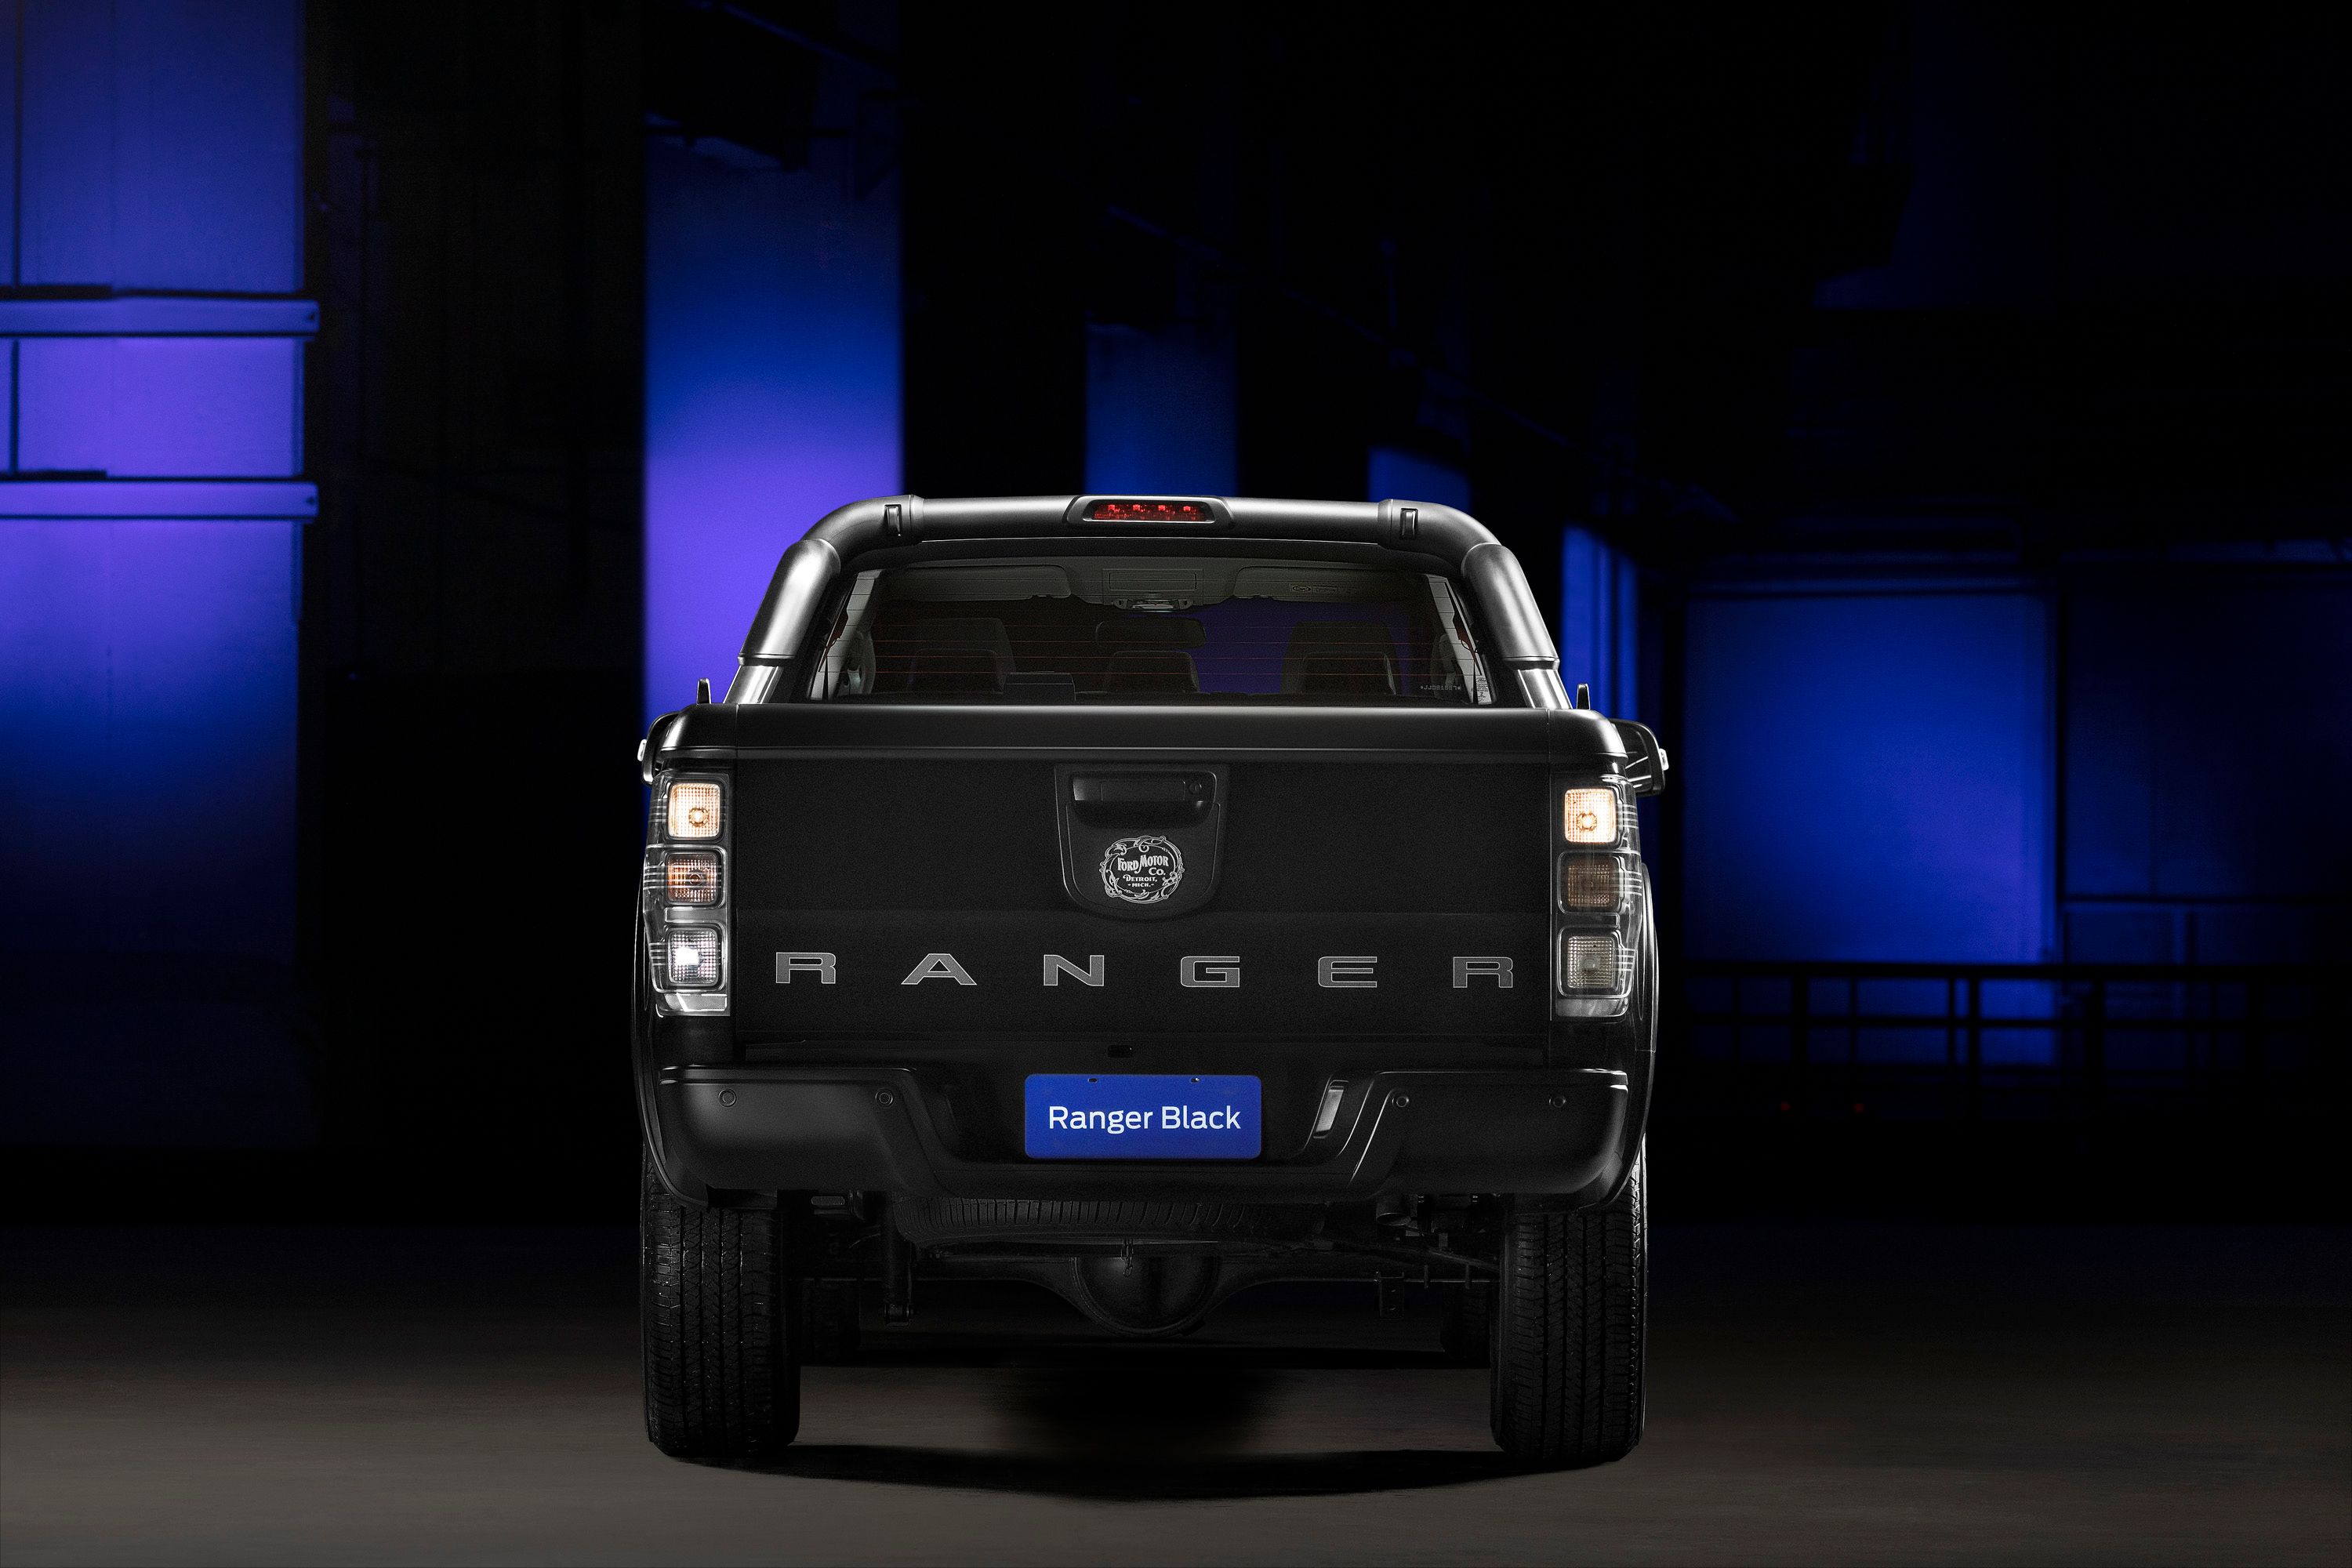 2018 Ford Ranger Storm Concept and Ford Ranger Black Edition